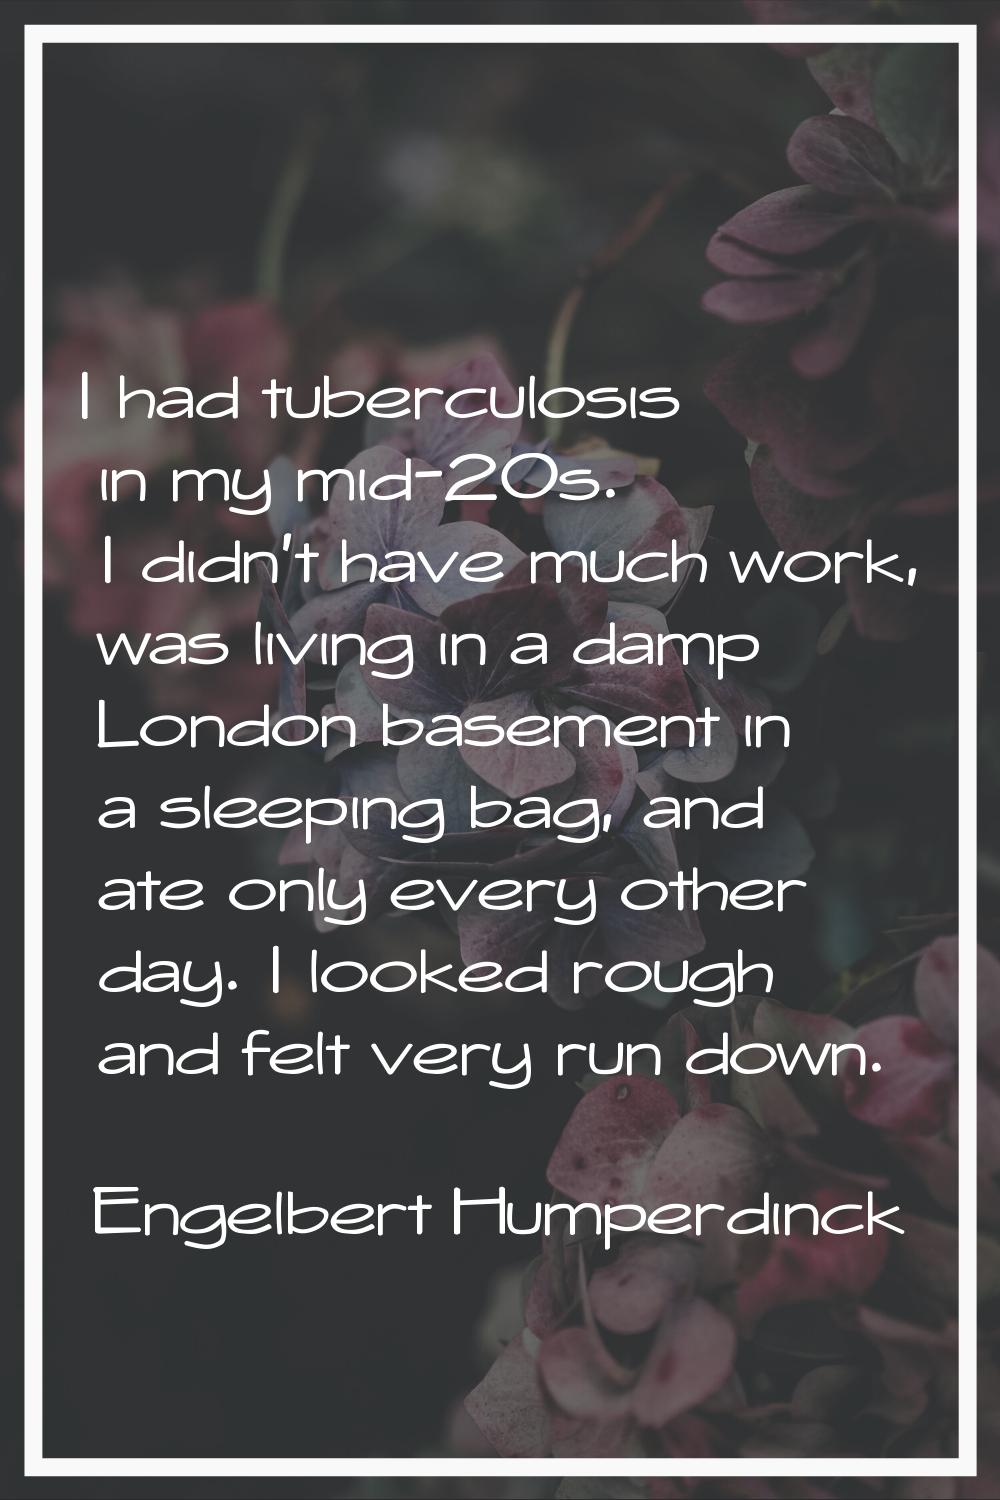 I had tuberculosis in my mid-20s. I didn't have much work, was living in a damp London basement in 